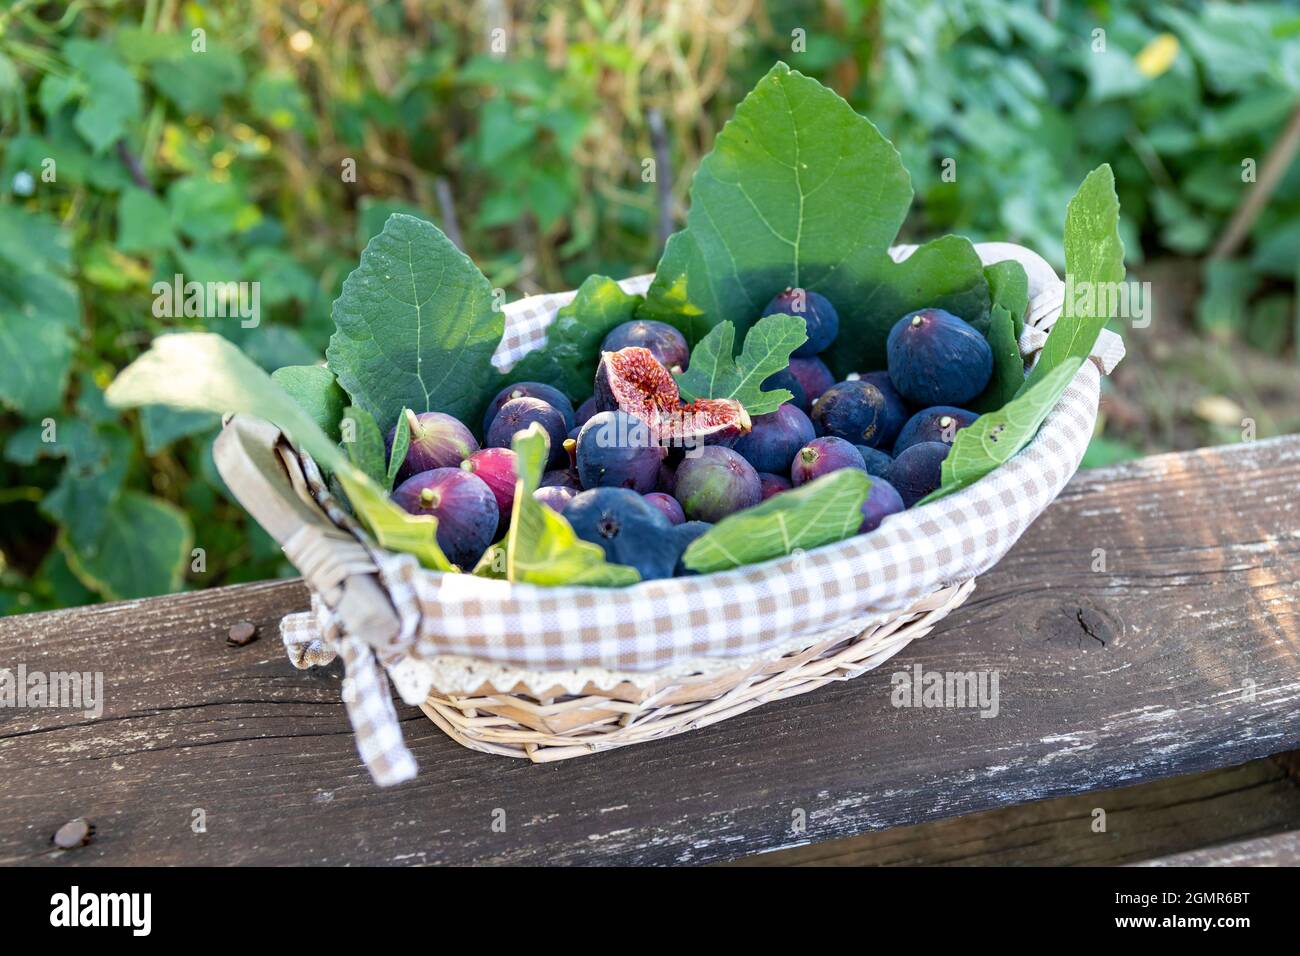 A wicker basket full of freshly picked purple figs on a wooden table. The cutted fig in the center invites the viewer to taste it. Countryside life co Stock Photo